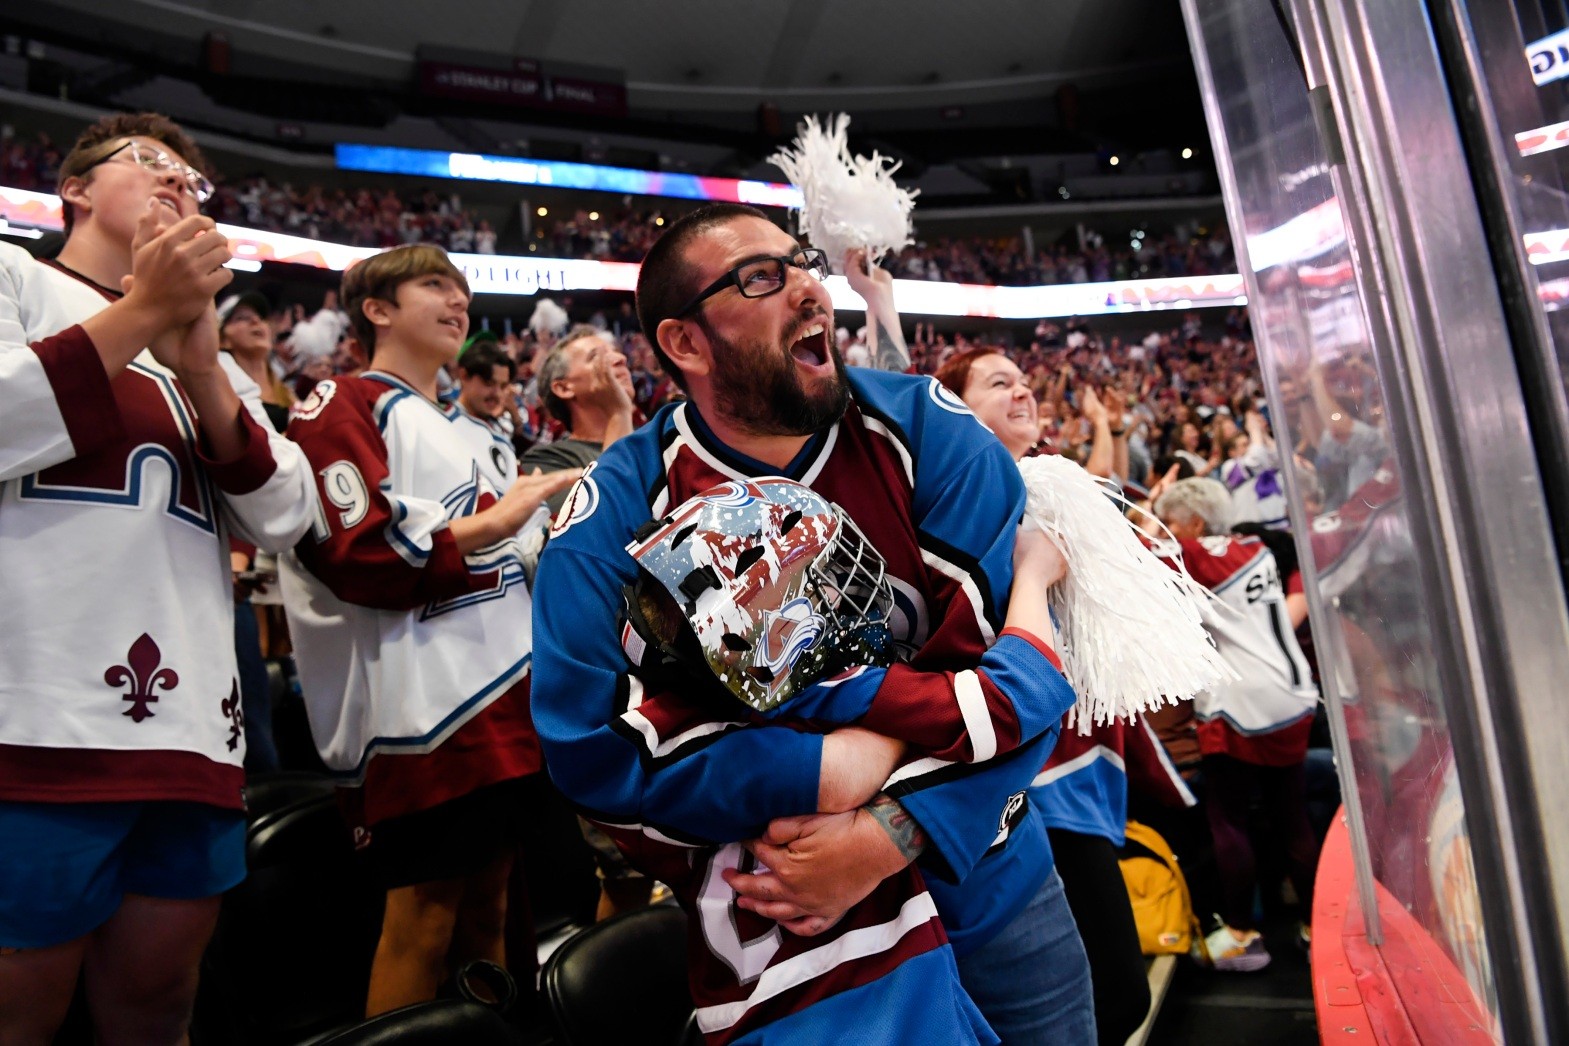 Avalanche vs. Lightning Live updates and highlights from Game 4 of the